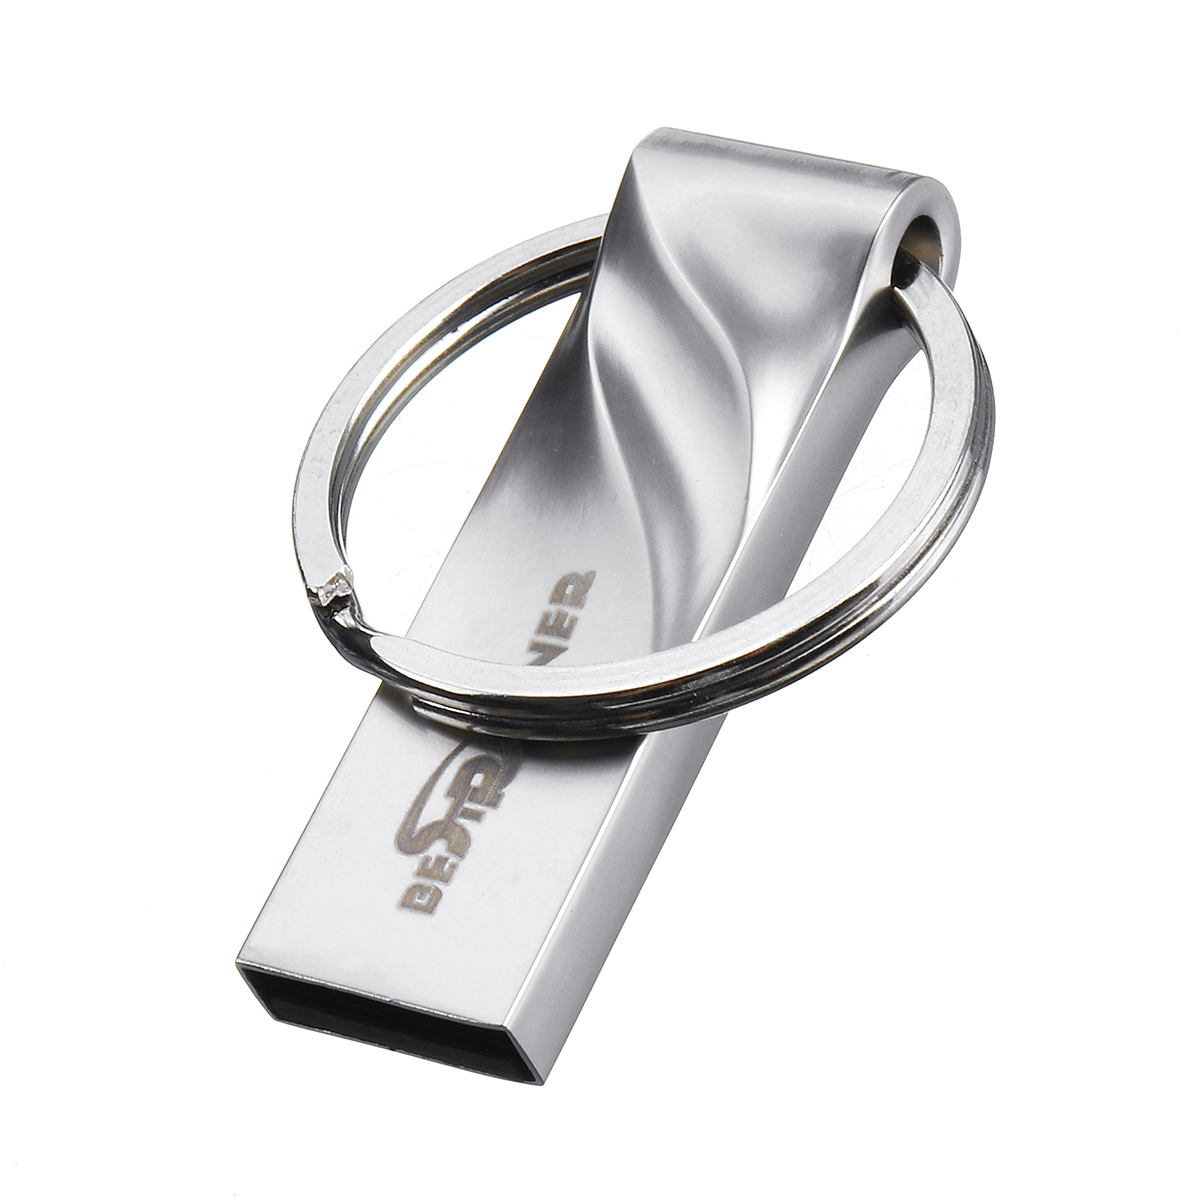 Find 16/32GB USB 2 0 Flash Drive Metal Flash Memory Card USB Stick Pen Drive U Disk for Sale on Gipsybee.com with cryptocurrencies